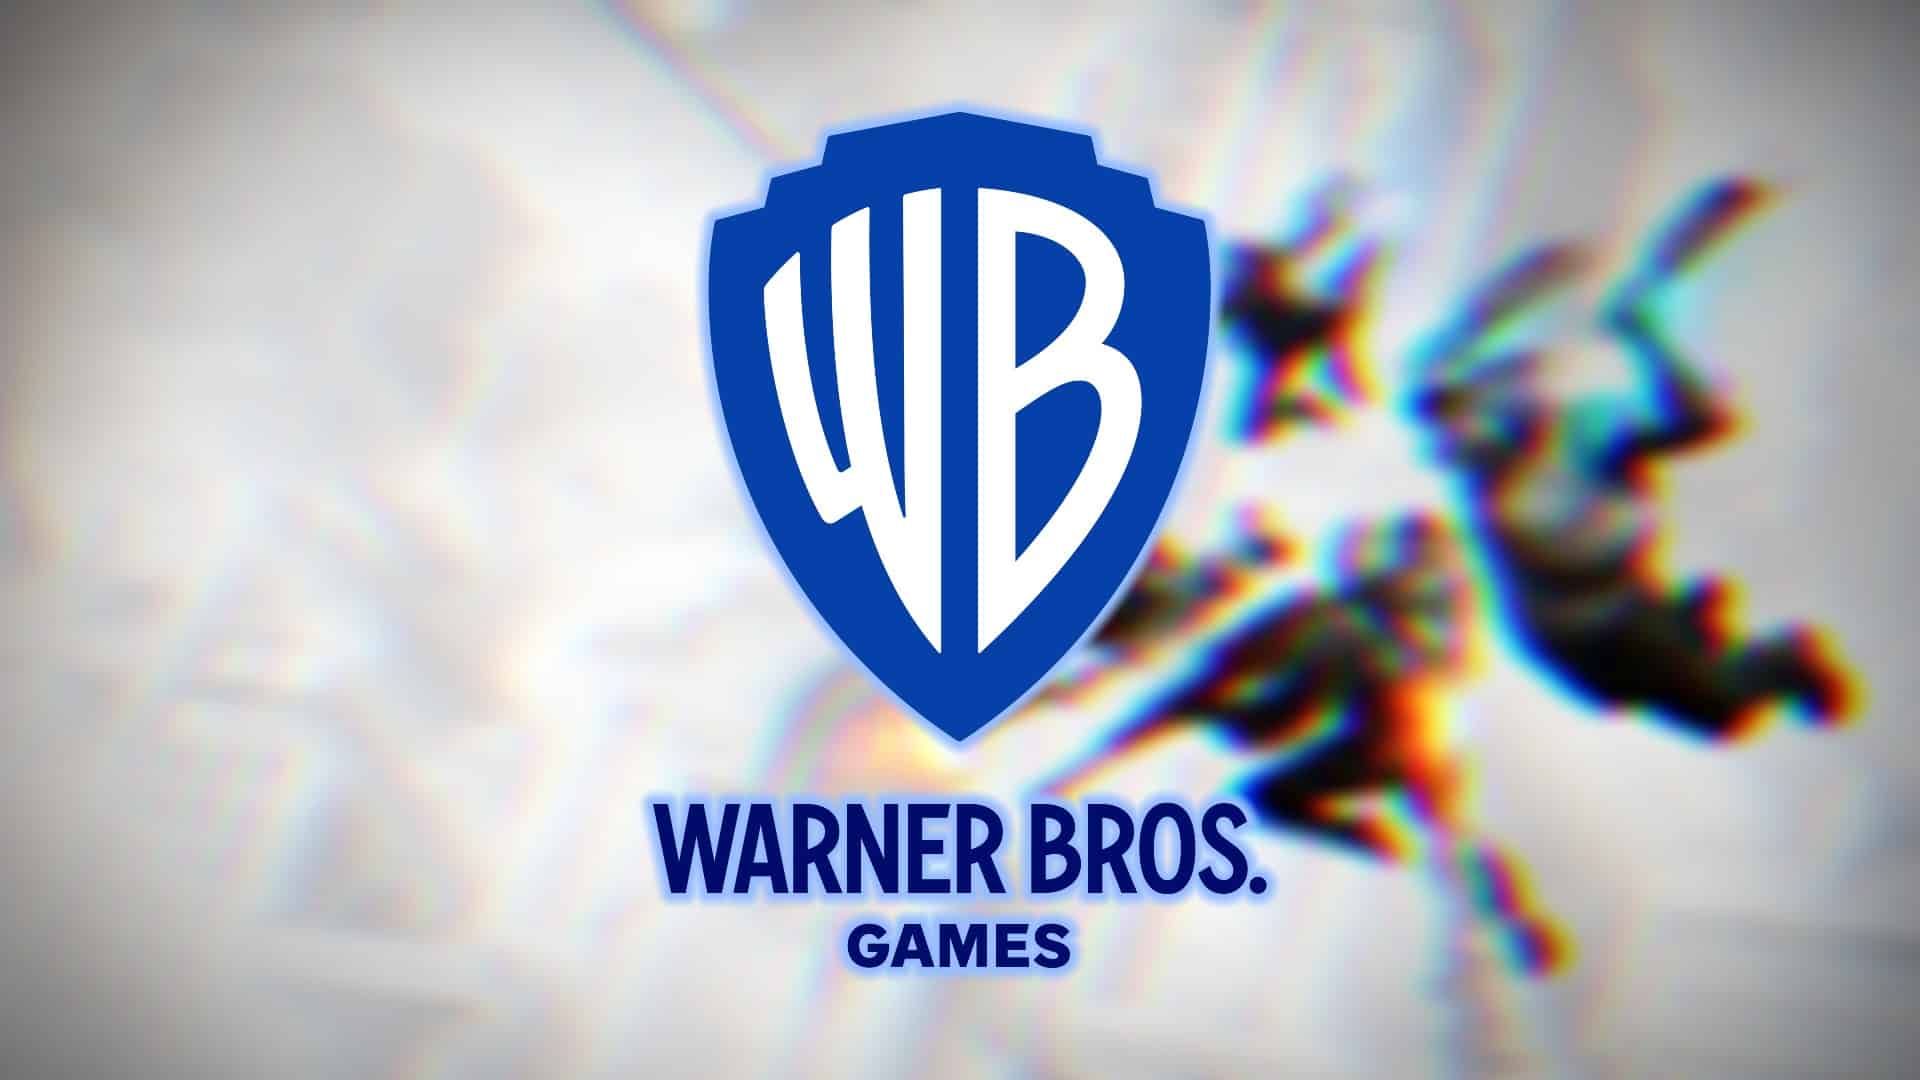 wb games mobile games